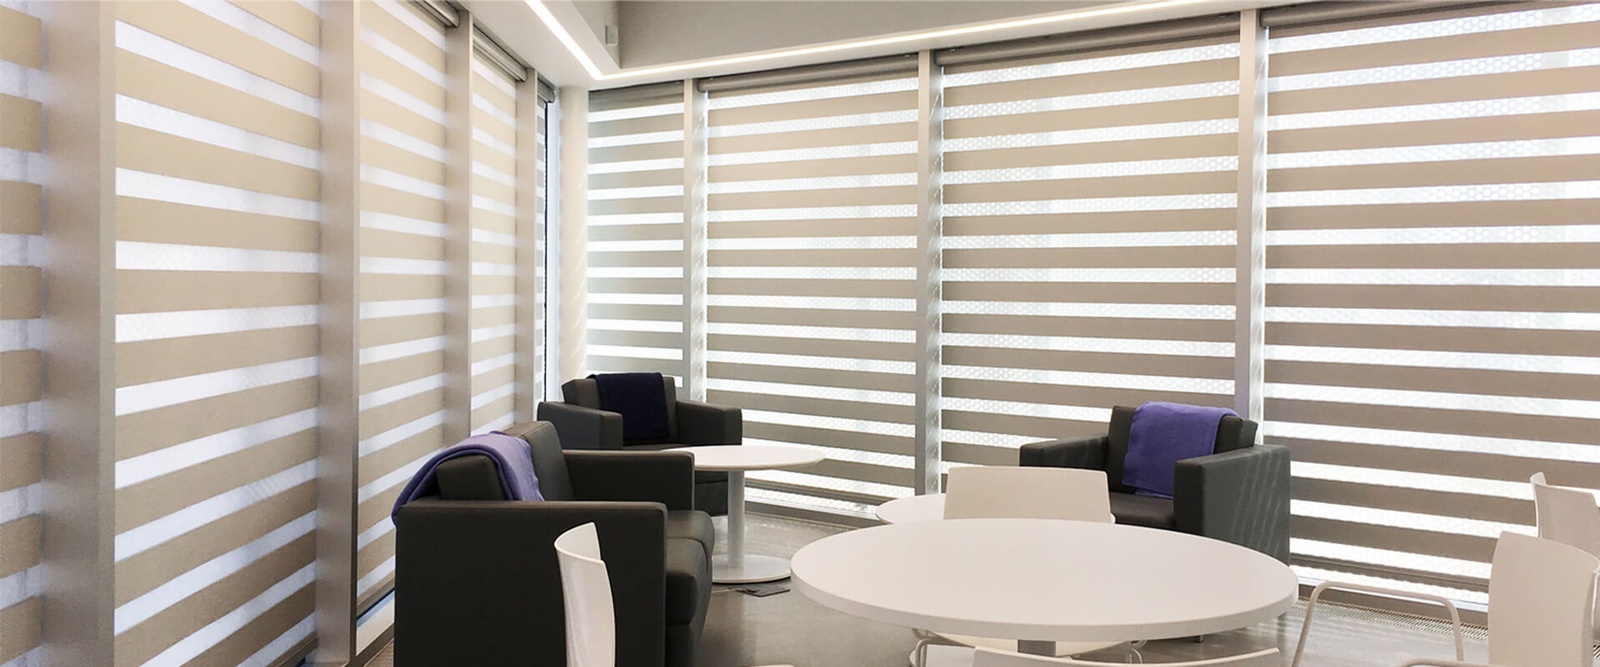 Get long-lasting, affordable installation of custom blinds in Edmonton for your house or office